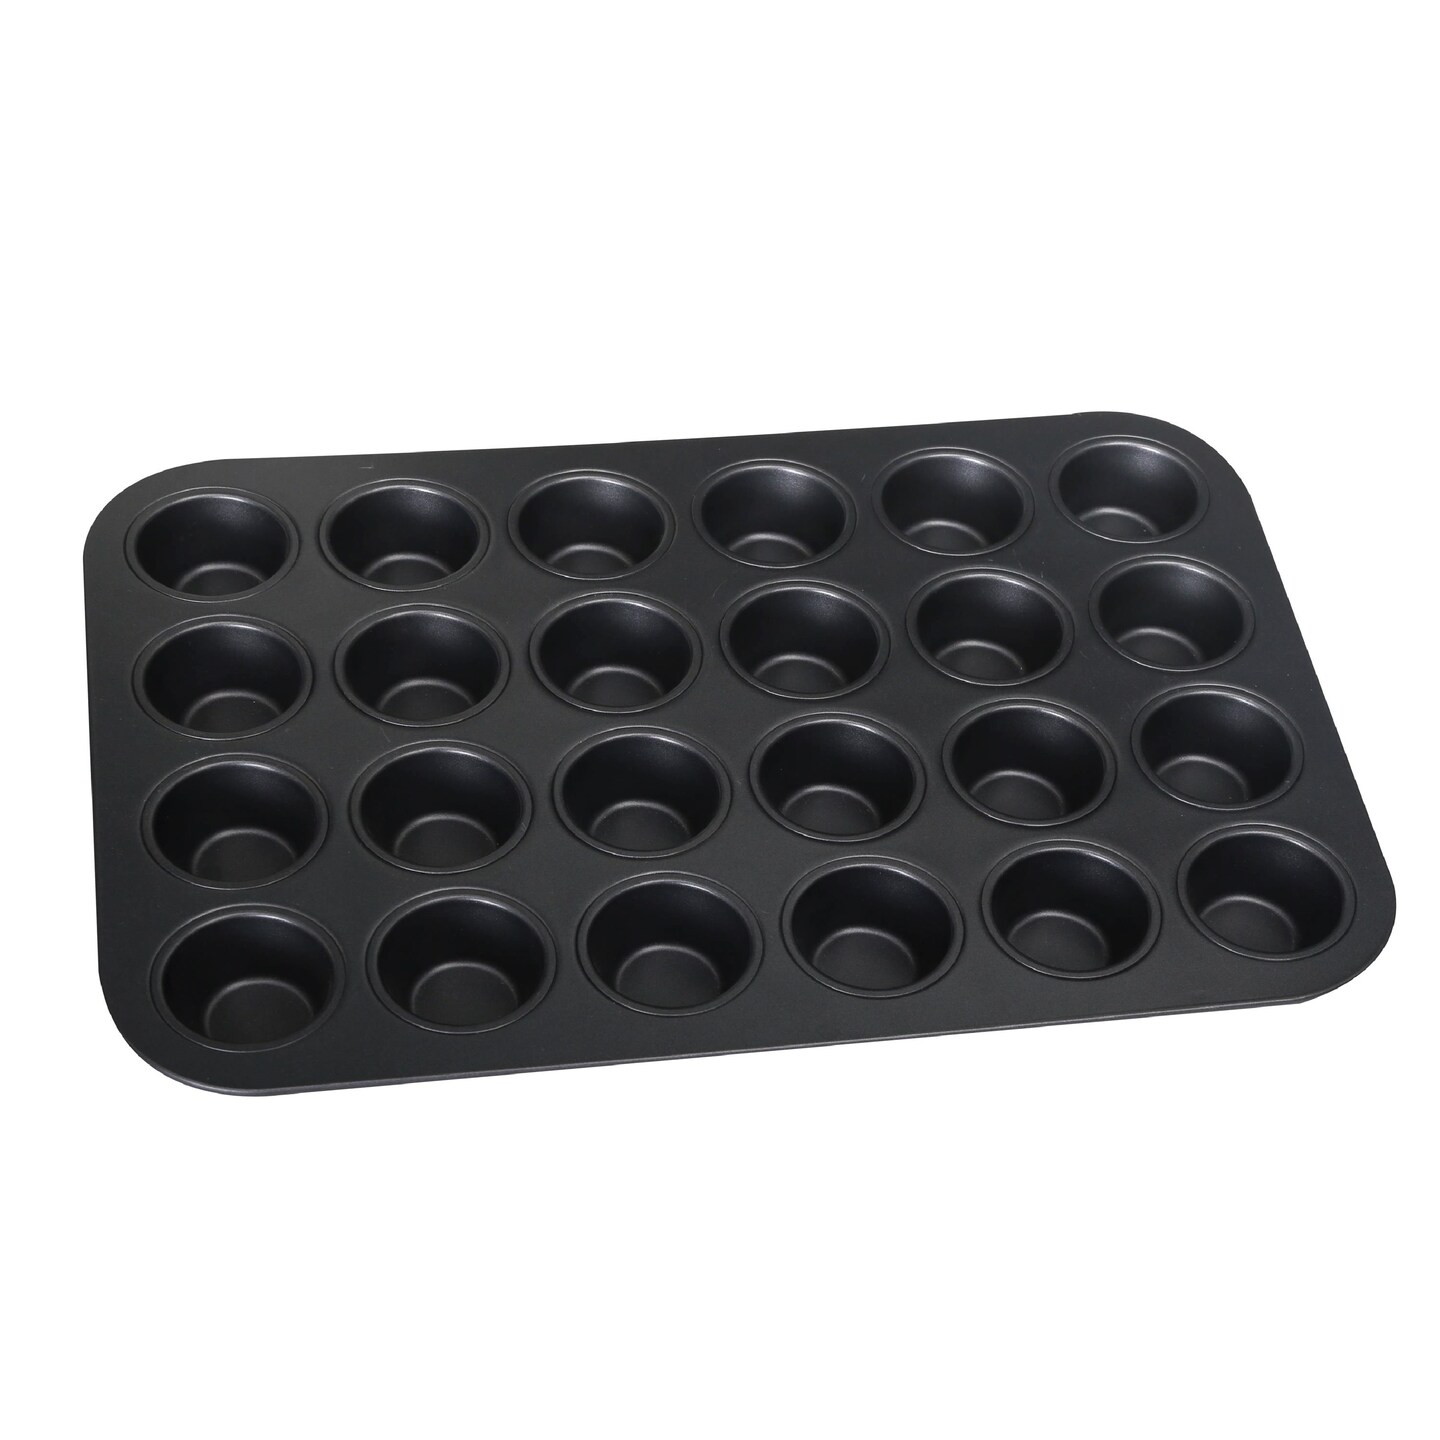 Baker&#x27;s Secret 24cup Mini Muffin Pan Cupcake Nonstick Pan - Carbon Steel Pan for Mini Muffins Cupcakes Non stick Coating Easy Release DIY Bakeware Baking Supplies - Advanced Collection